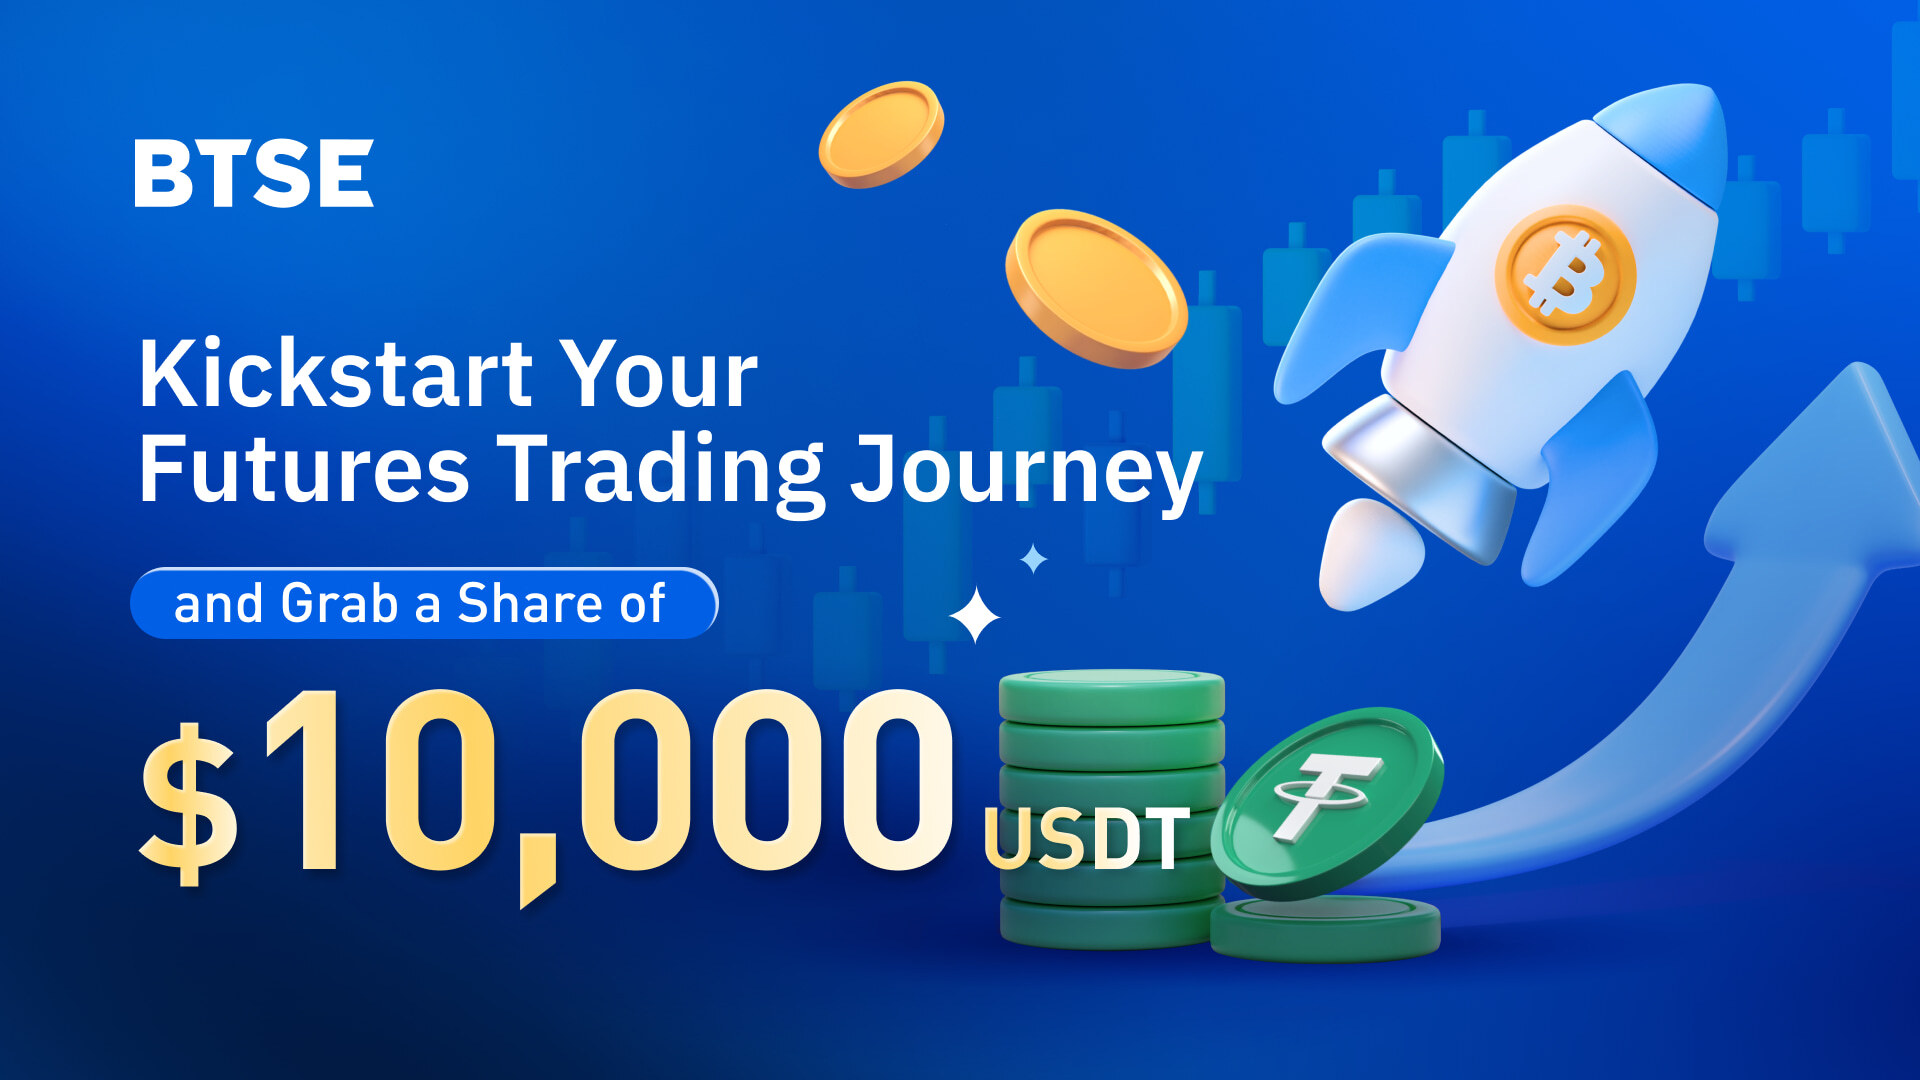 Kickstart Your Futures Trading Journey and Grab a Share of $10,000 USDT!